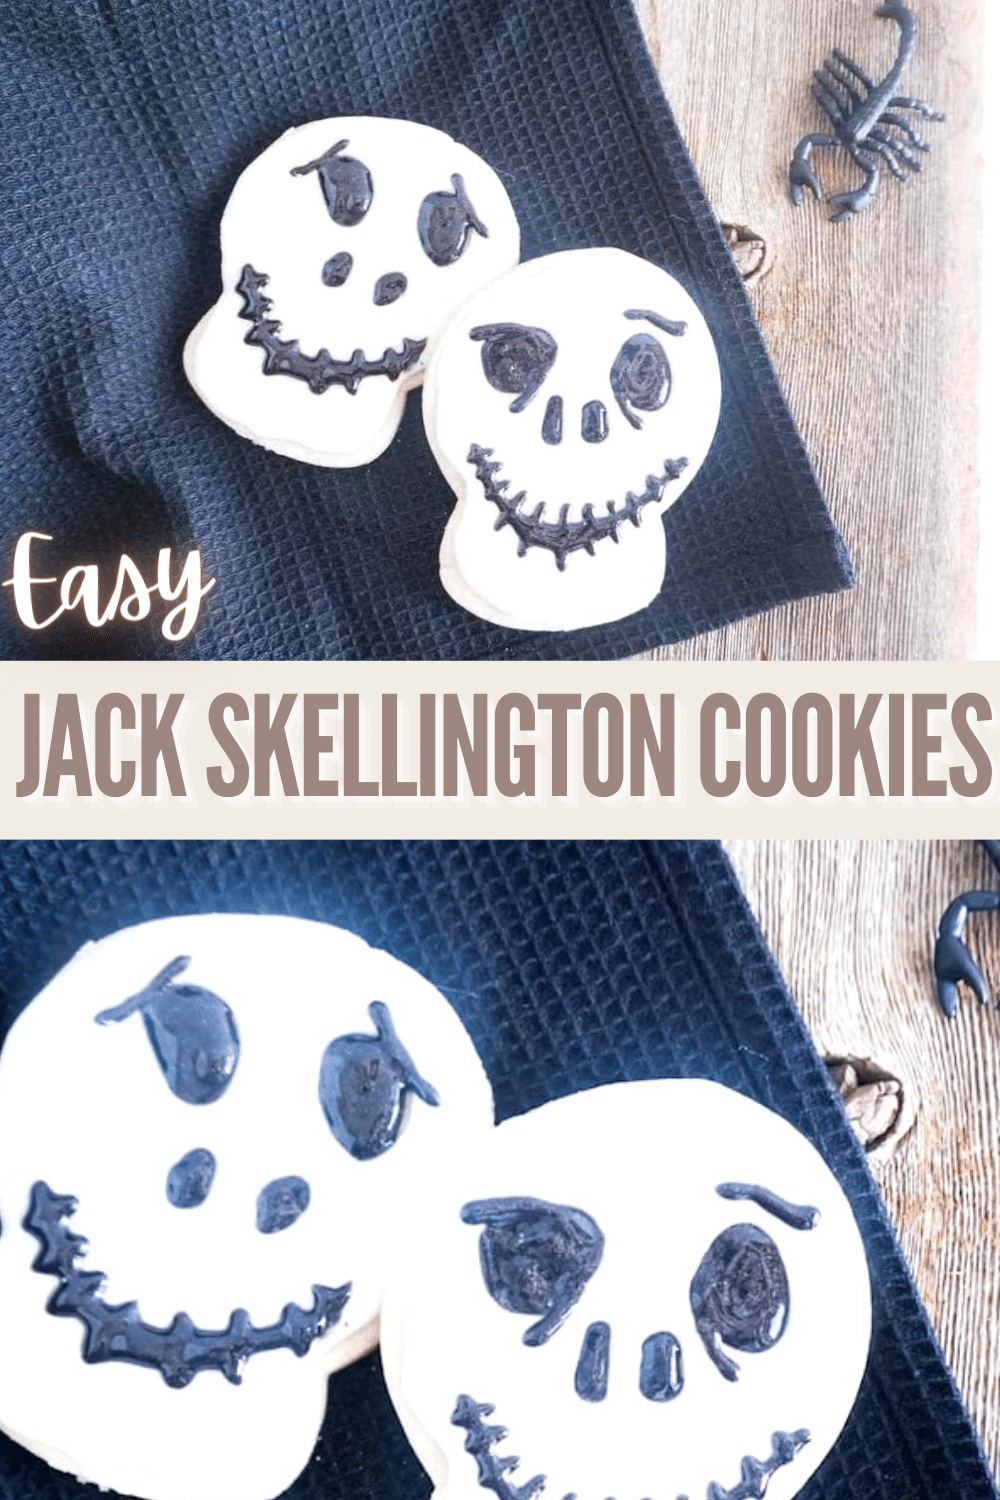 These easy Jack Skellington cookies are so simple, but really fun. And, the best part, there are plenty to go around to share on Halloween--or Christmas. #jackskellington #cookierecipe #halloween #christmas via @wondermomwannab